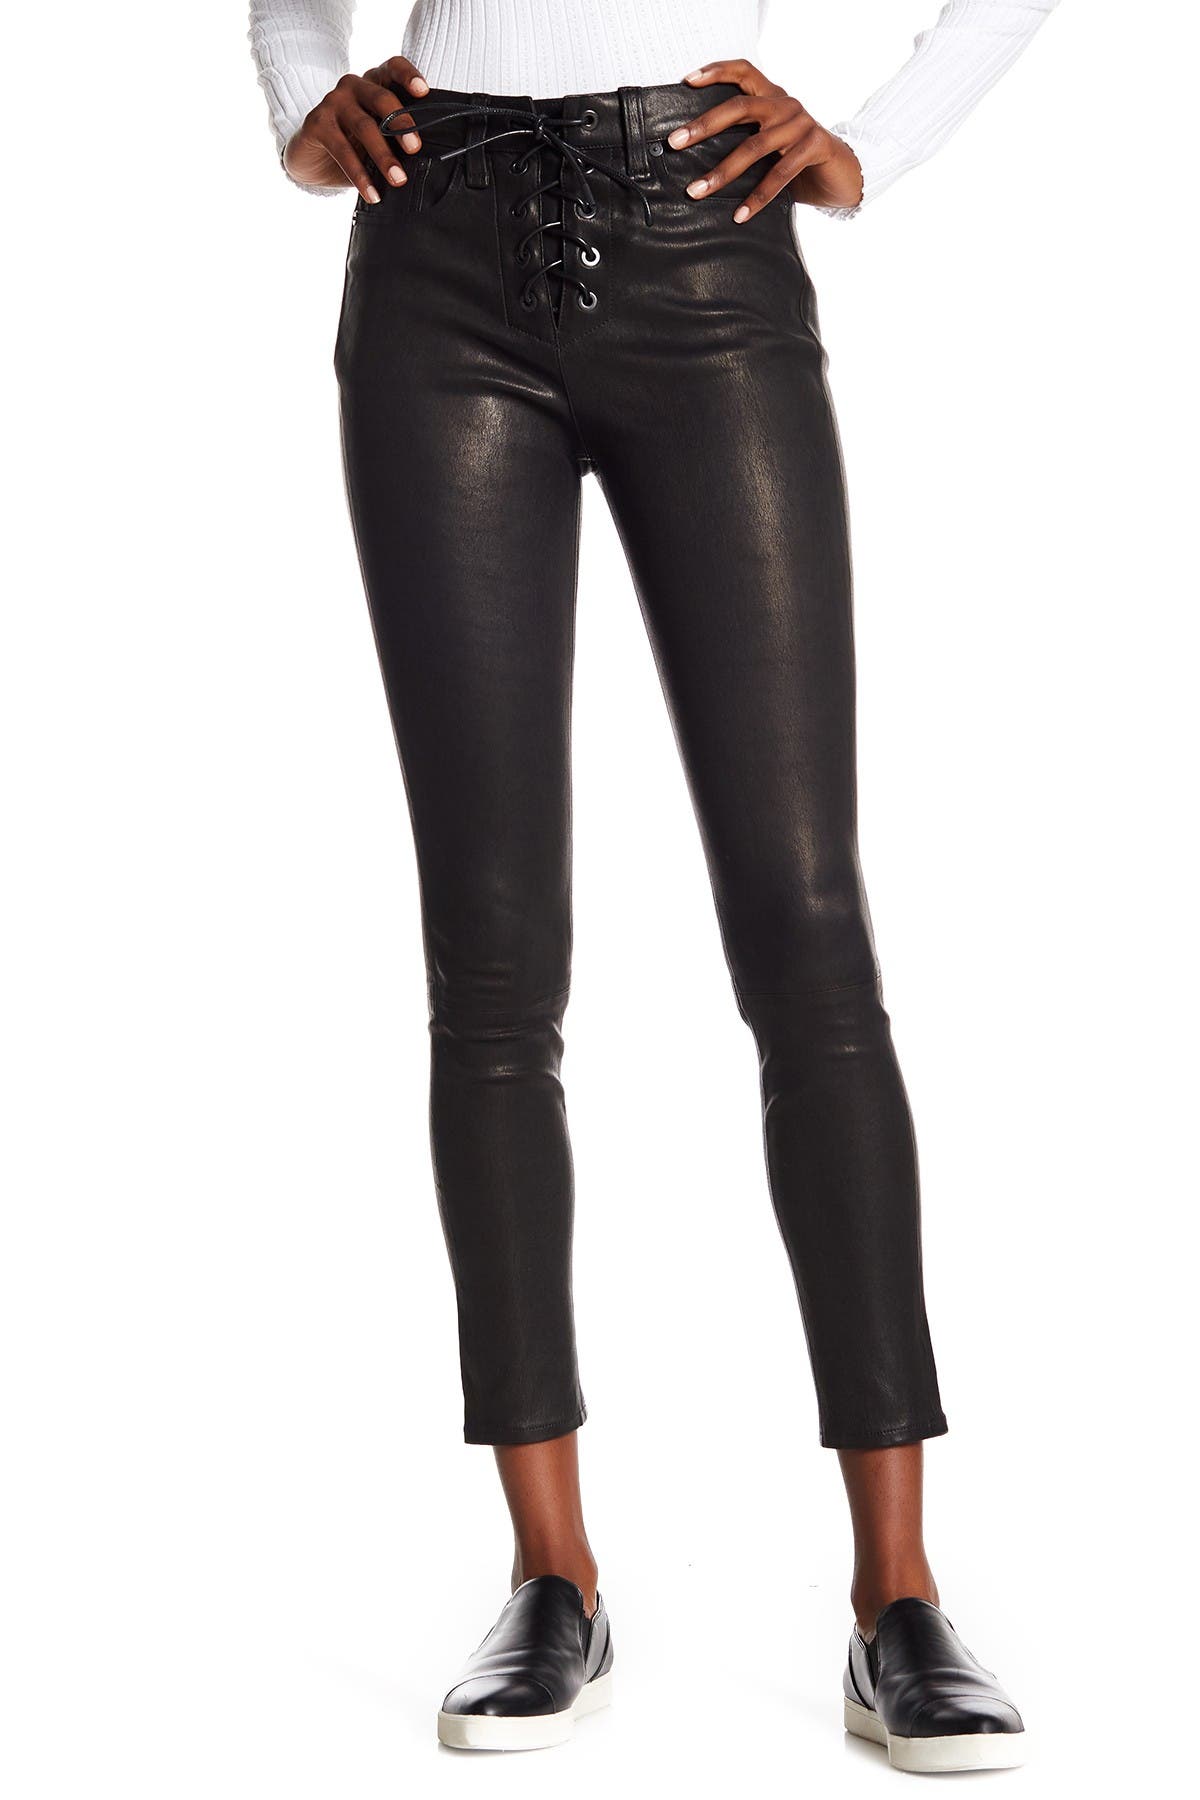 rag and bone lace up leather pants